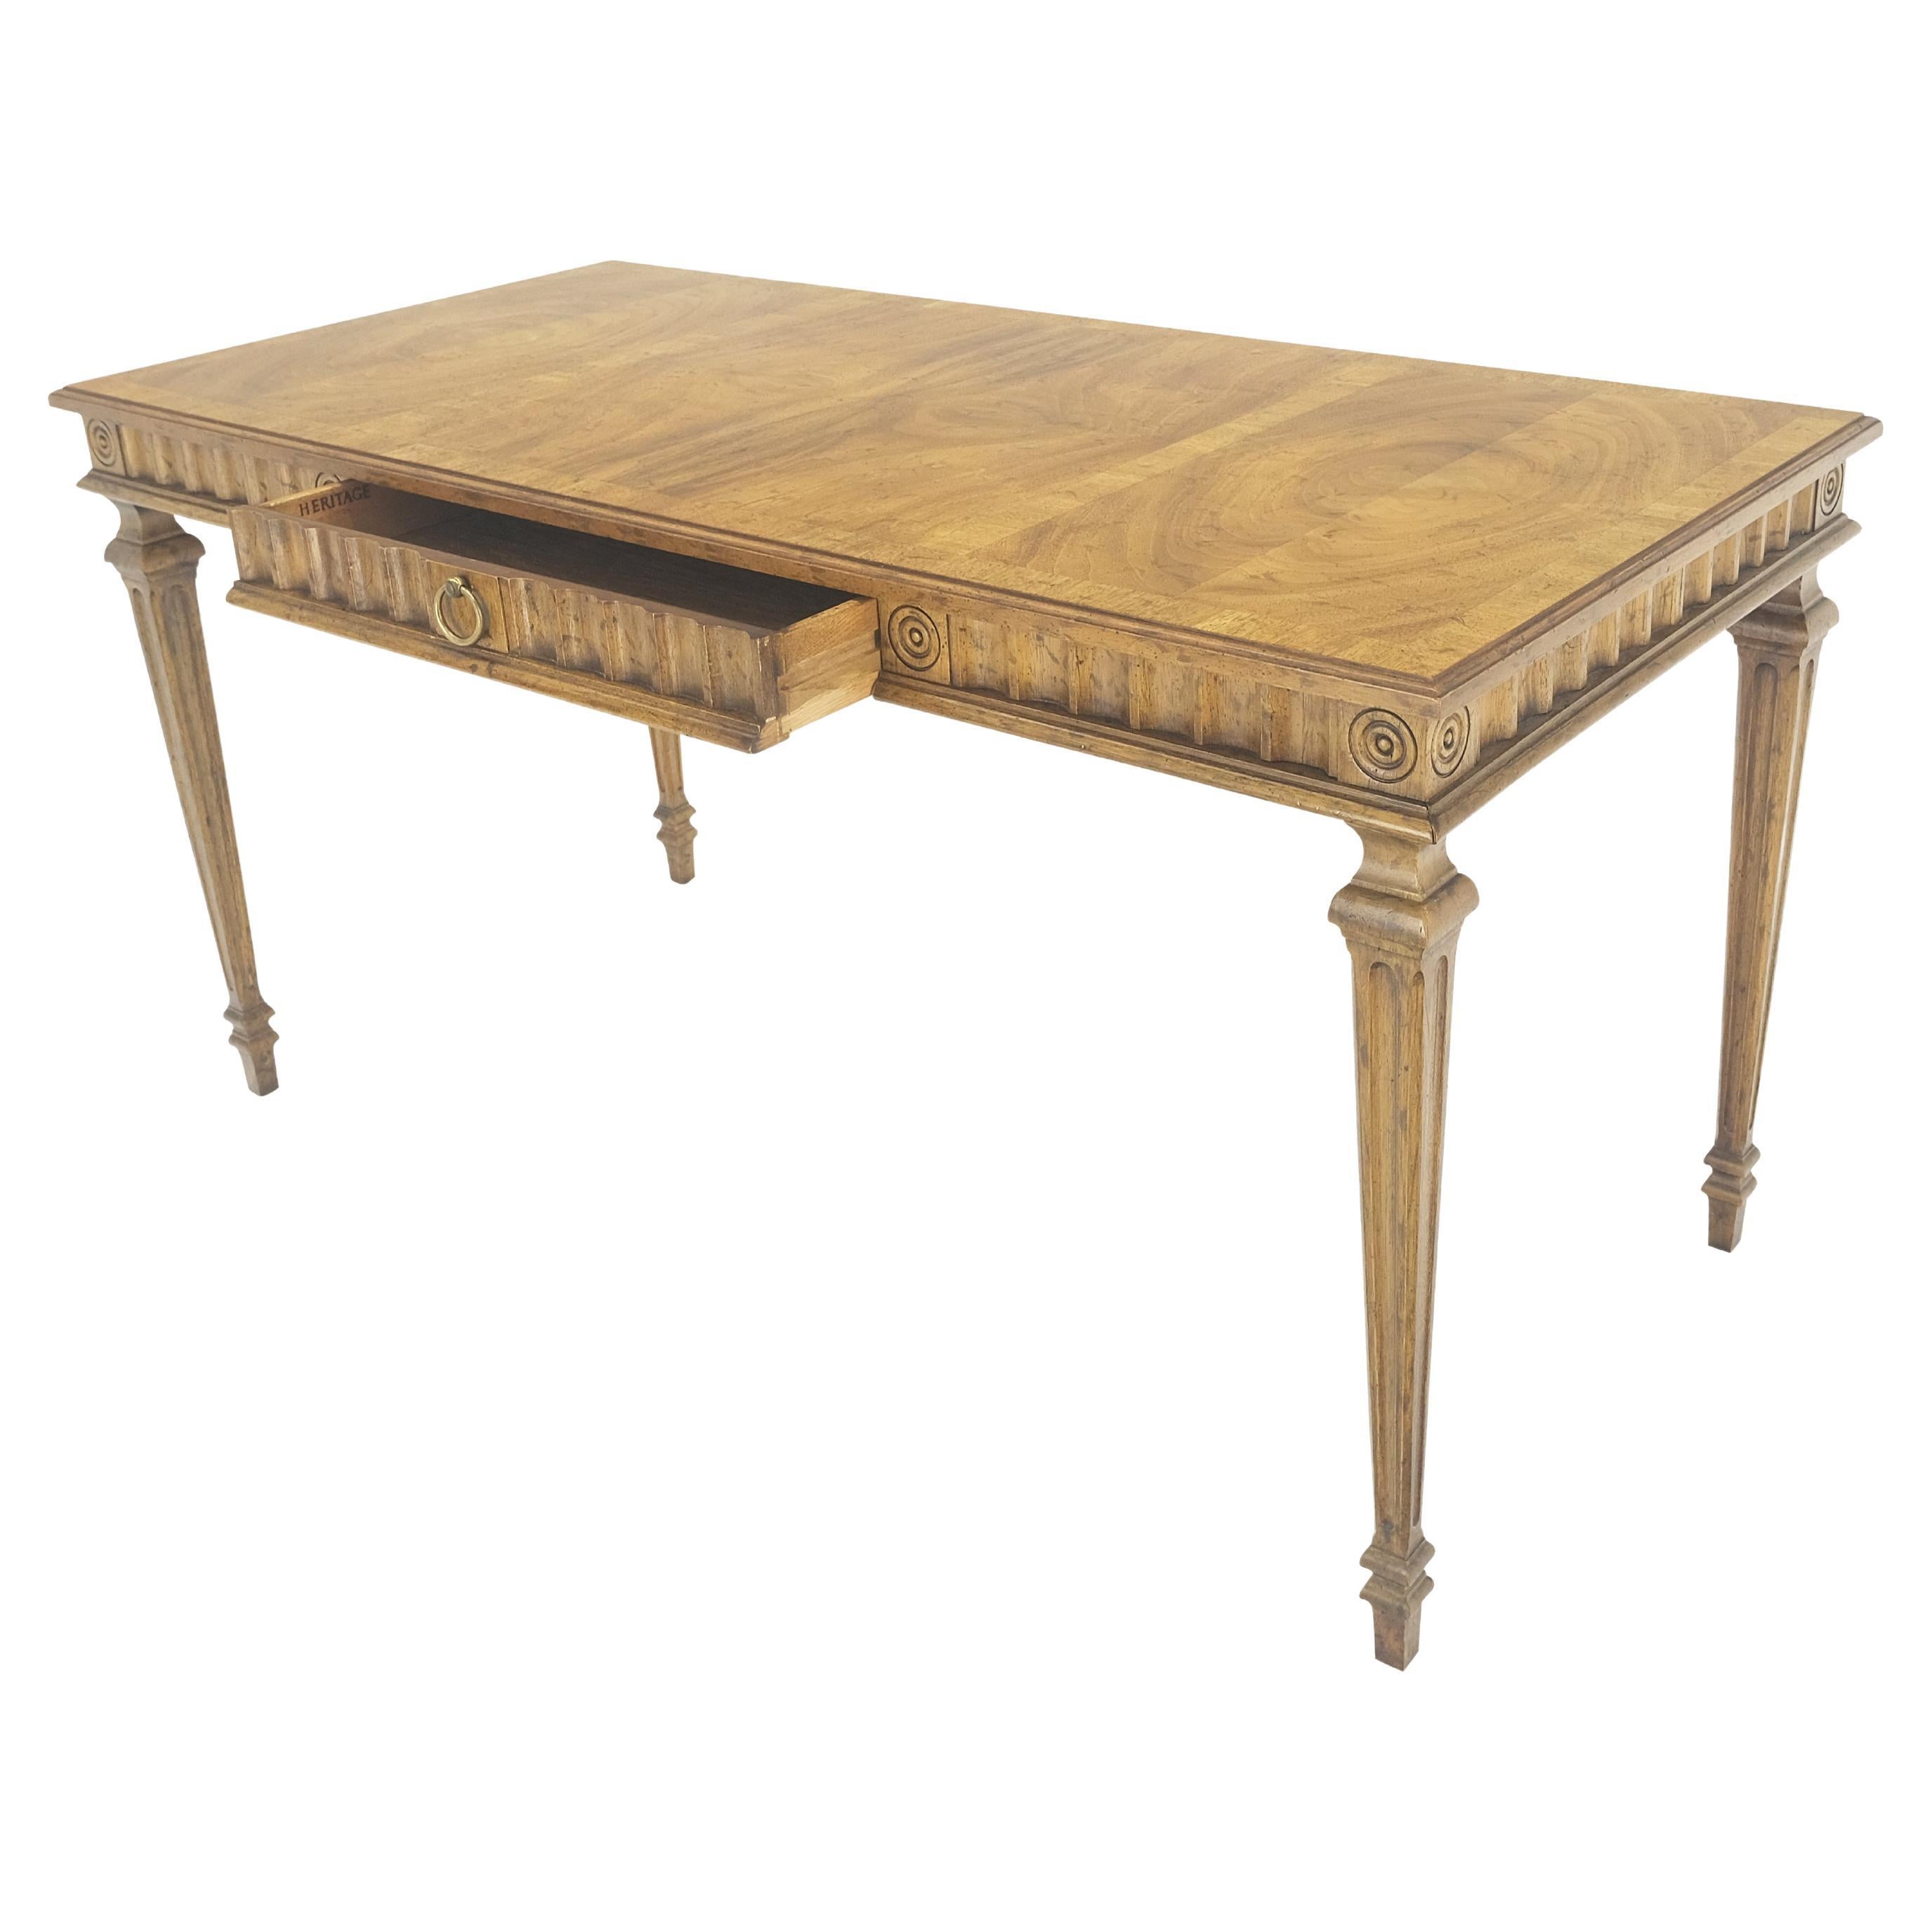 Heritage Furniture Desks and Writing Tables